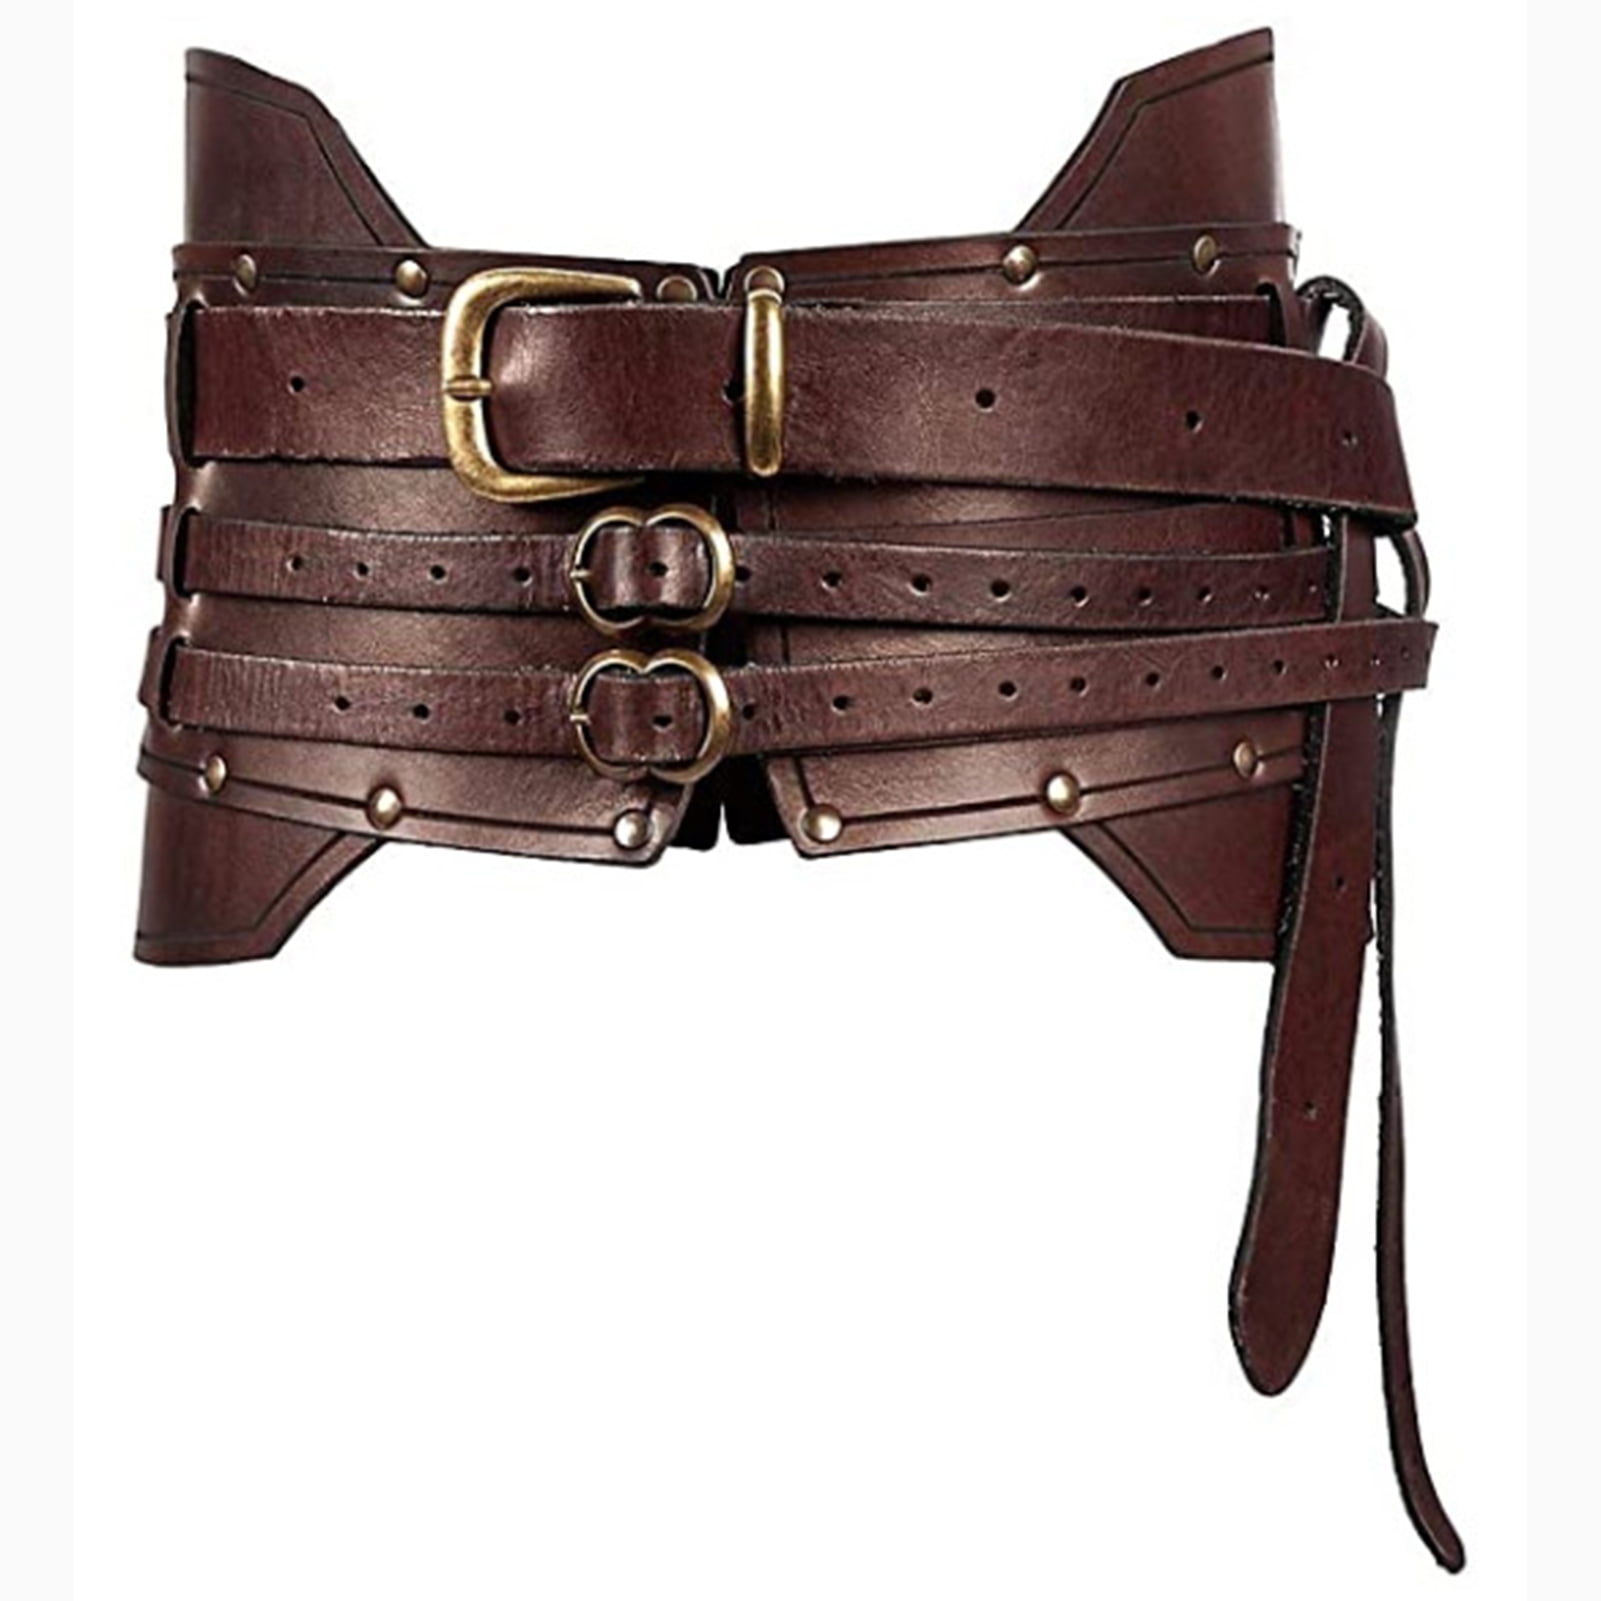 Medieval Knight Long Belt with Square Metal Buckle 